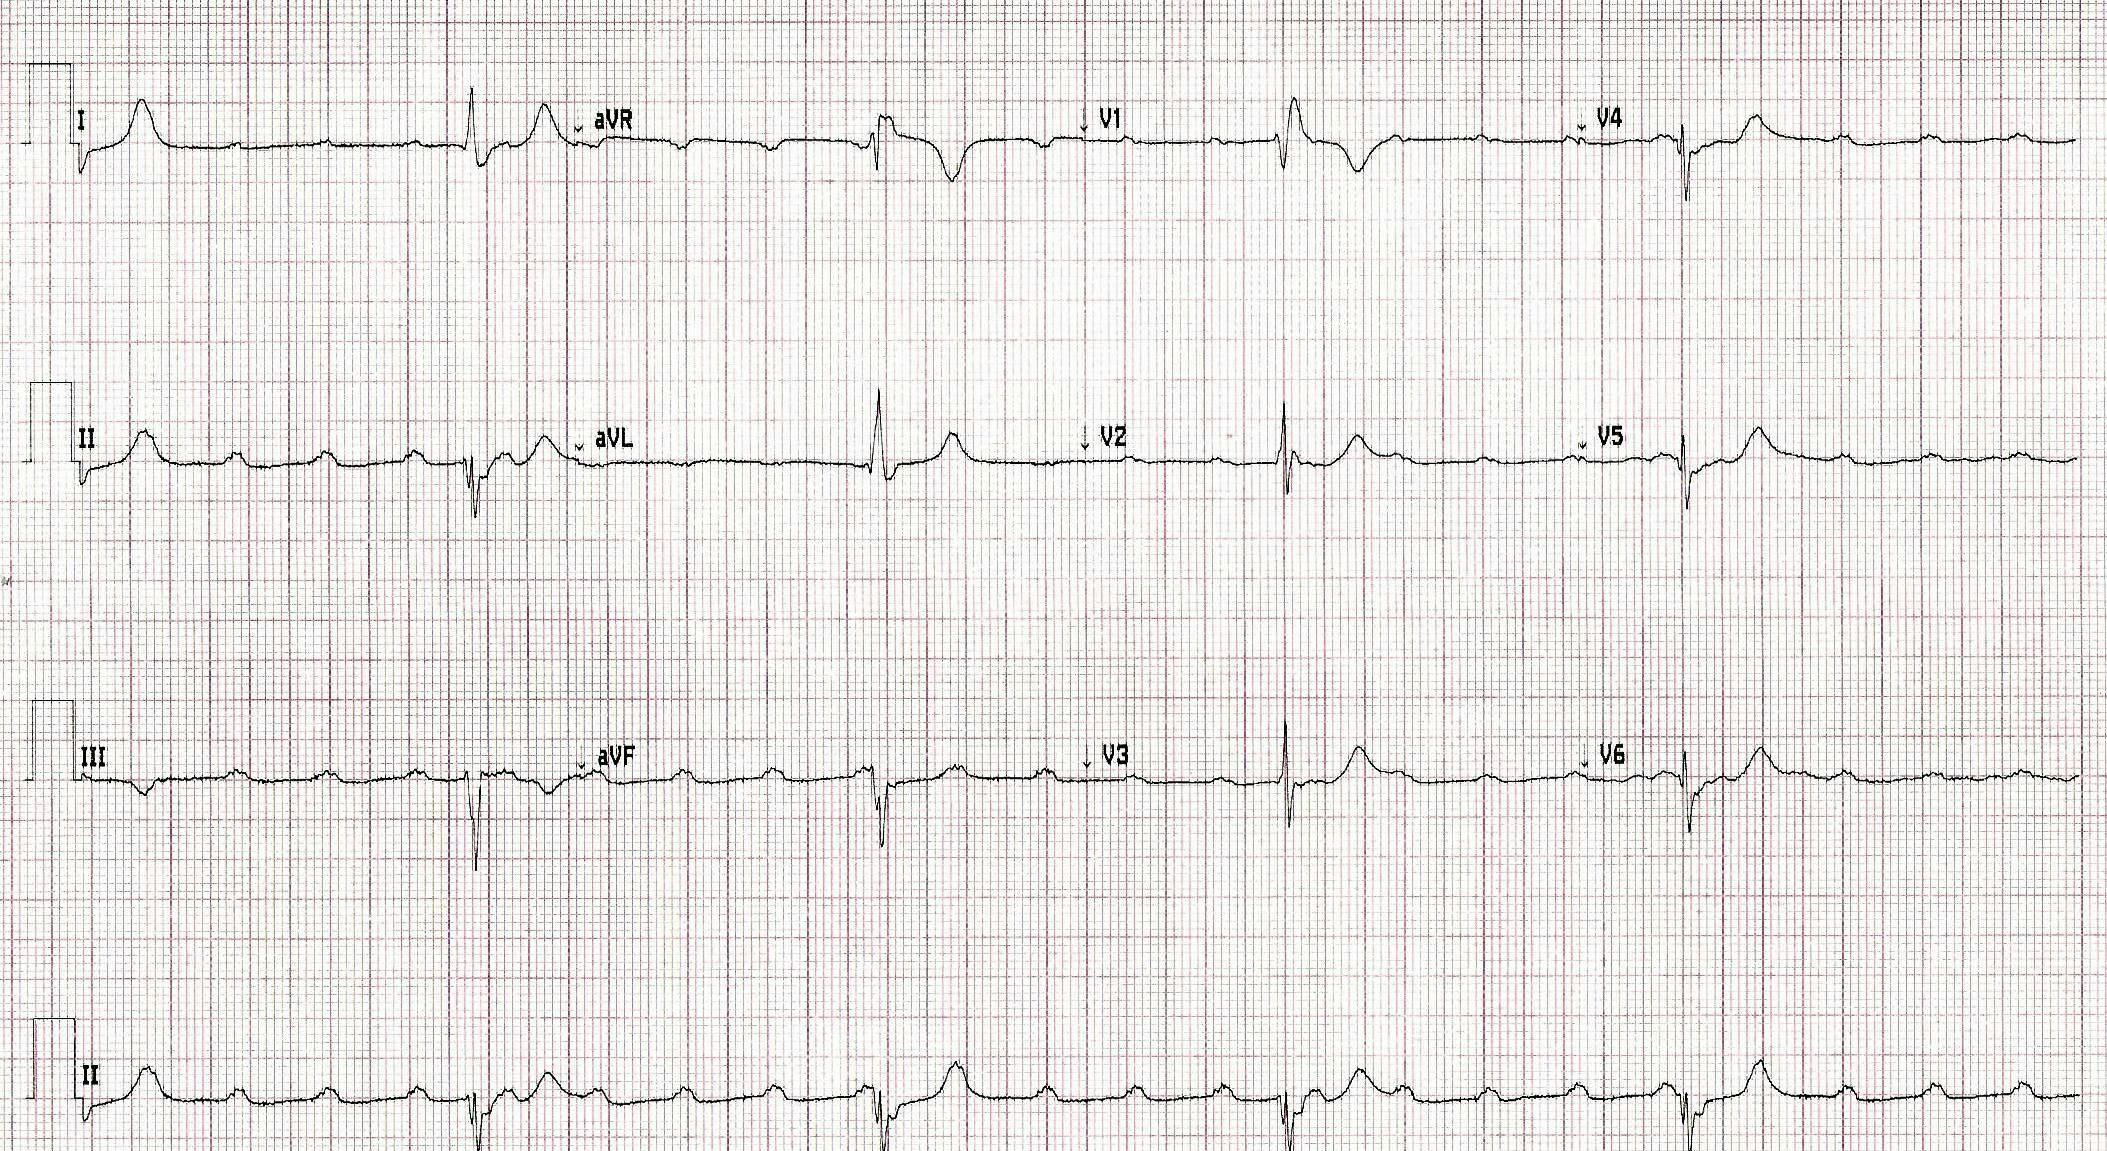 ECG print out from a patient experiencing chest pain